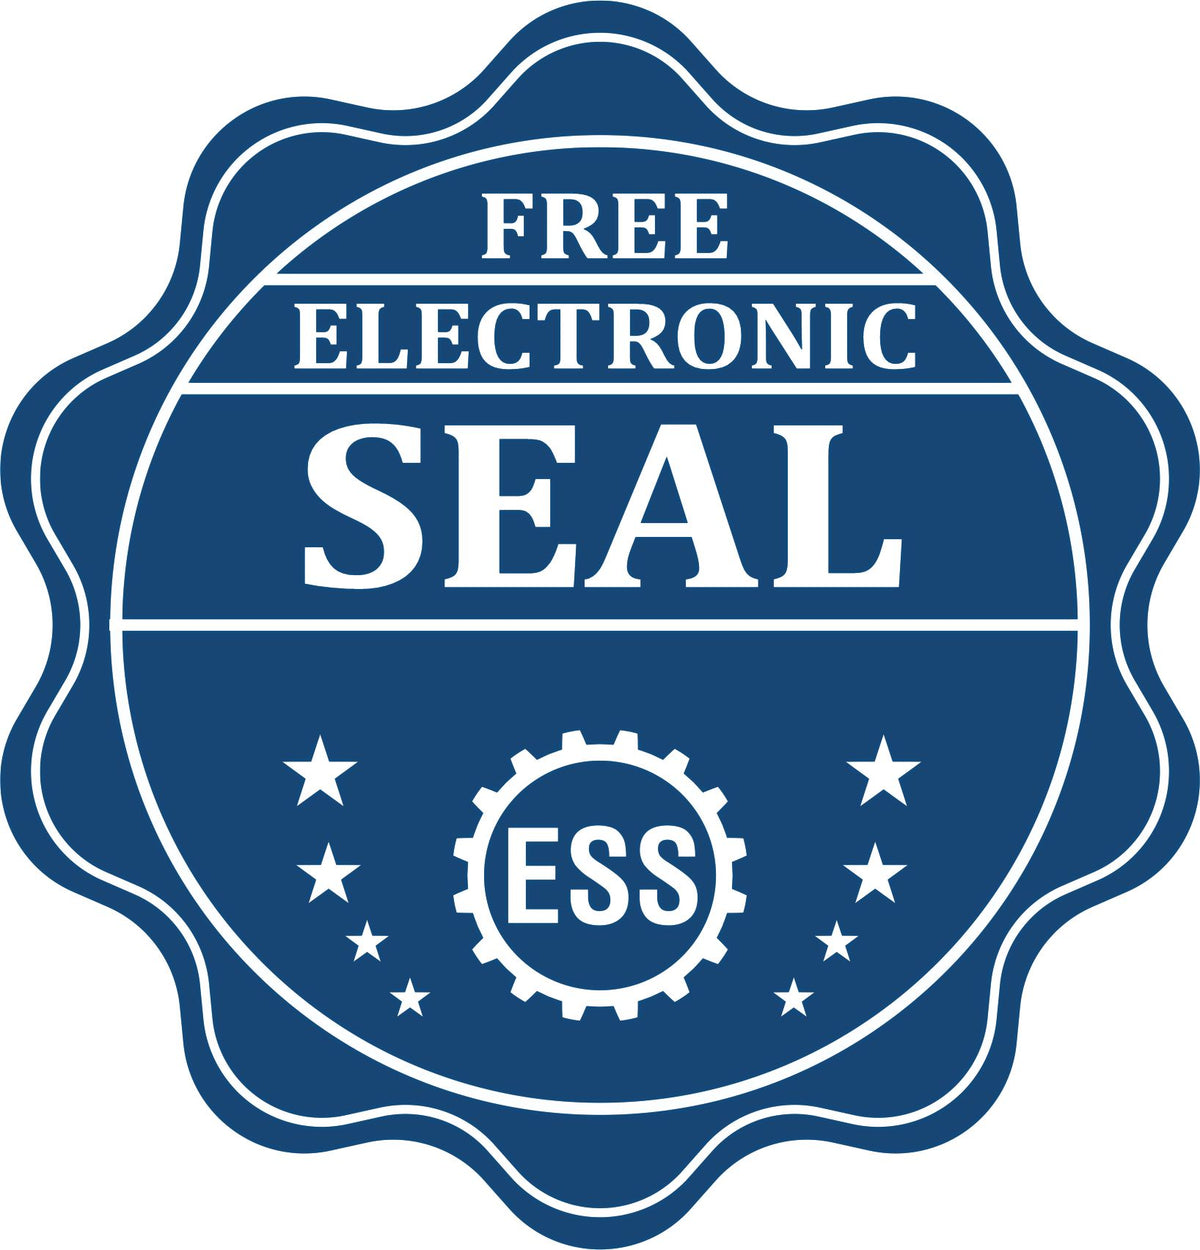 A badge showing a free electronic seal for the Heavy Duty Cast Iron Montana Land Surveyor Seal Embosser with stars and the ESS gear on the emblem.